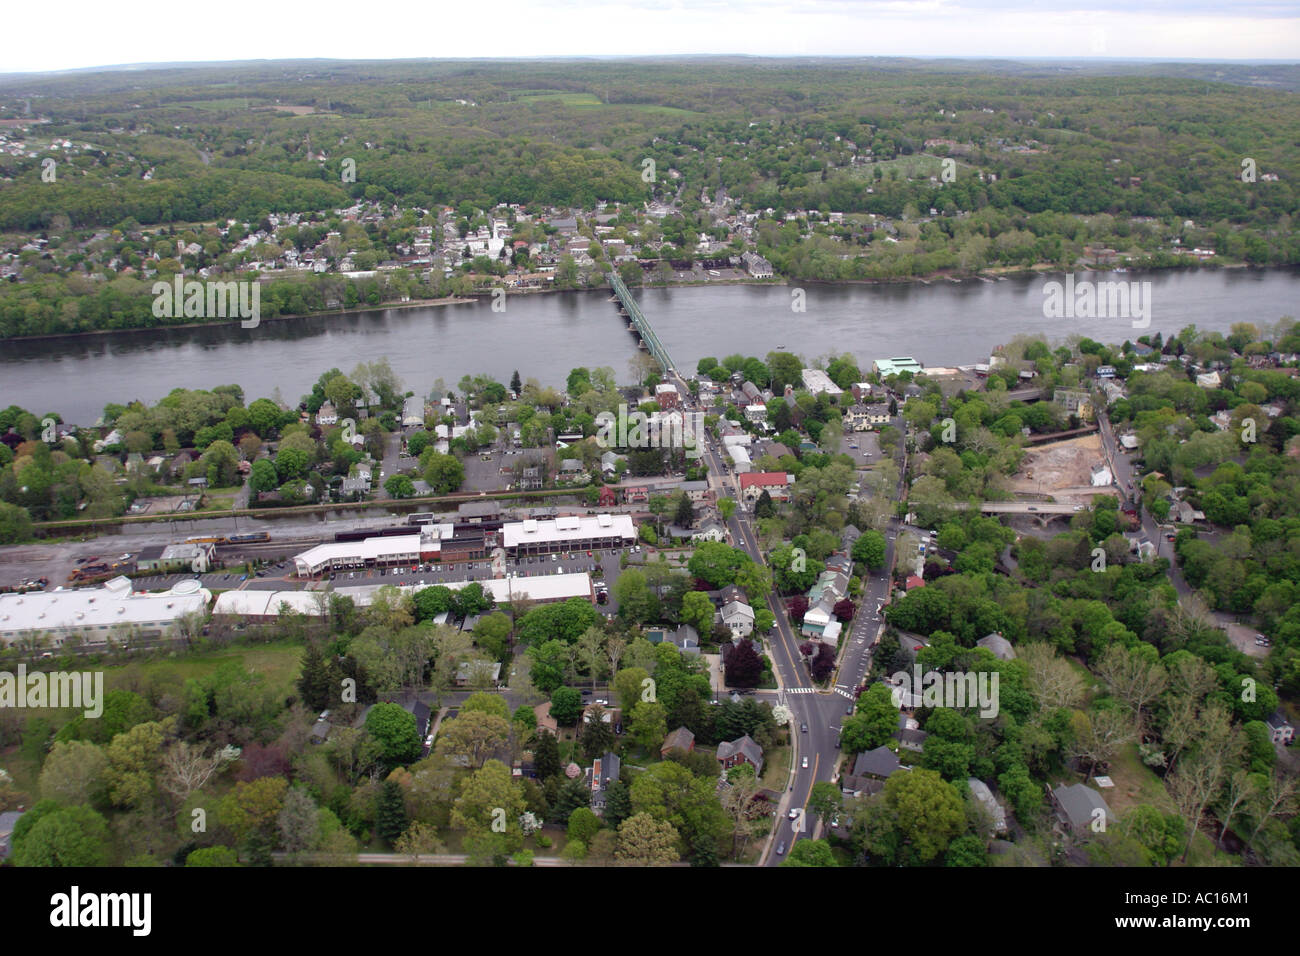 Aerial view of New Hope, Pennsylvania, U.S.A. Stock Photo